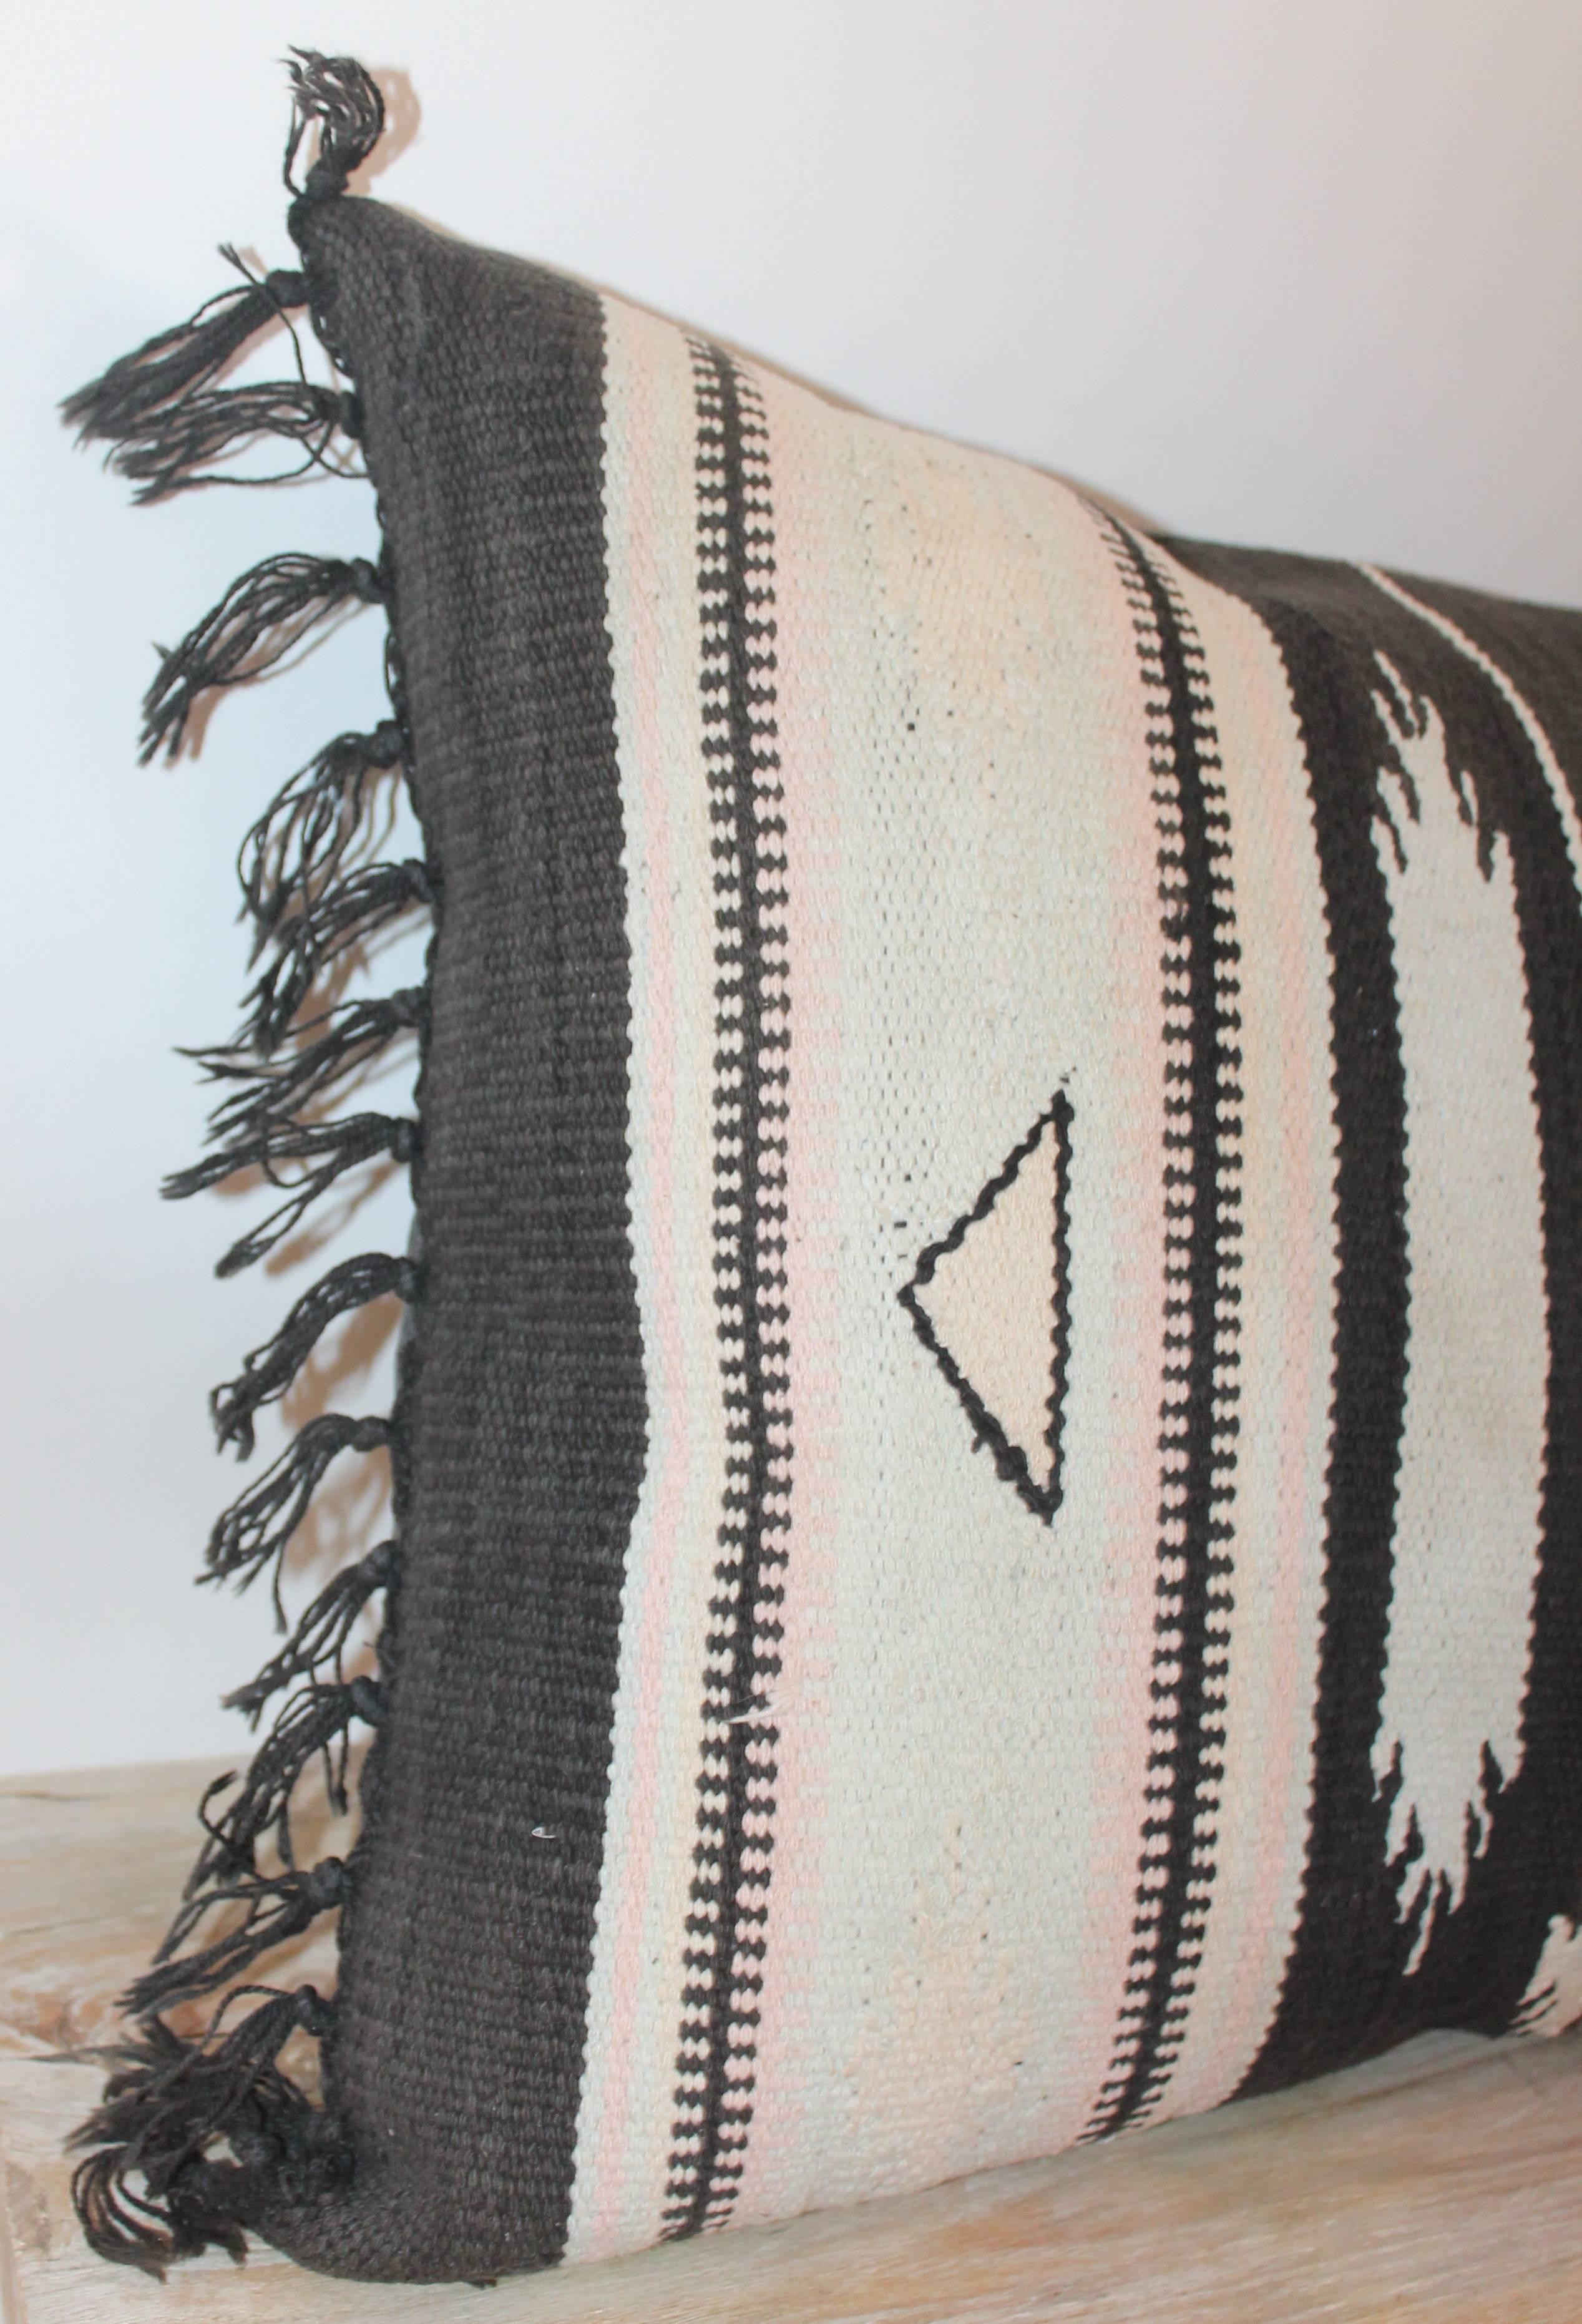 This fine Mexican / American Indian weaving bolster pillow has the original fringe and is in great condition. The backing is in black cotton linen.